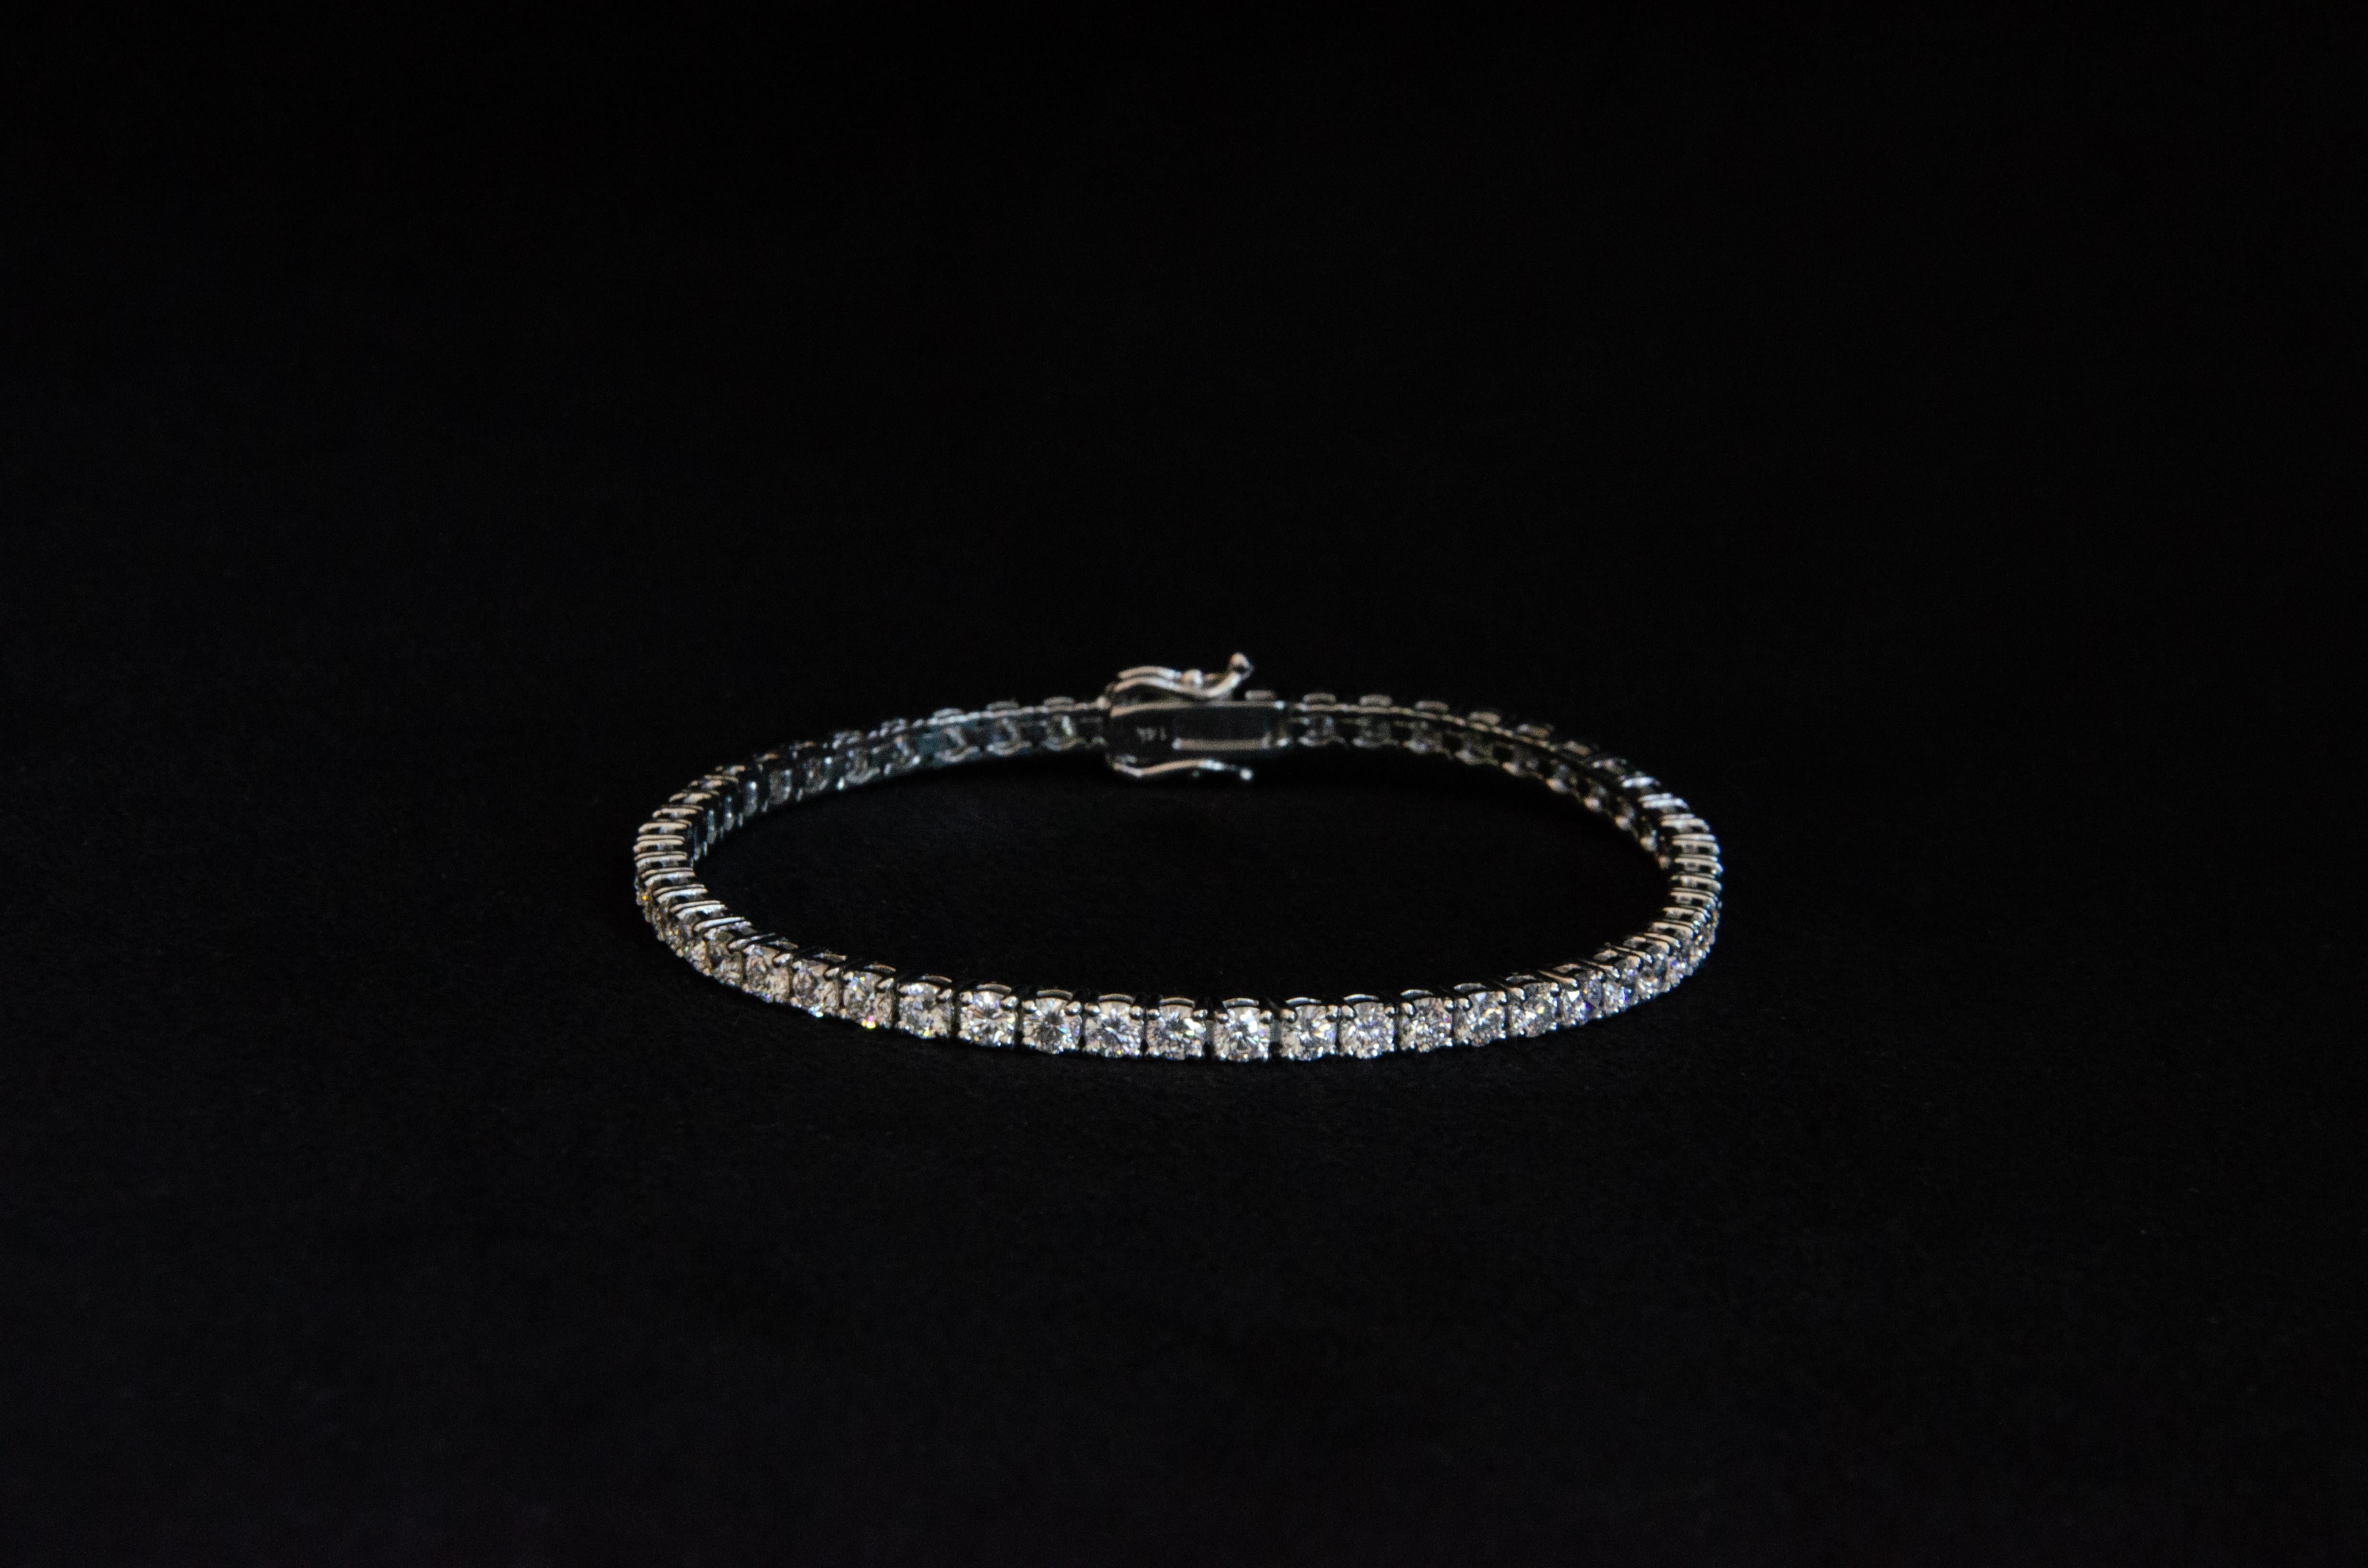 Introducing the Tennis Bracelet - a modern classic crafted with exquisite attention to detail, this bracelet showcases 5 carats of lab-created diamonds delicately set on a 7in 14k white gold bracelet. 

Each Ruth Nyc piece is handmade to order in